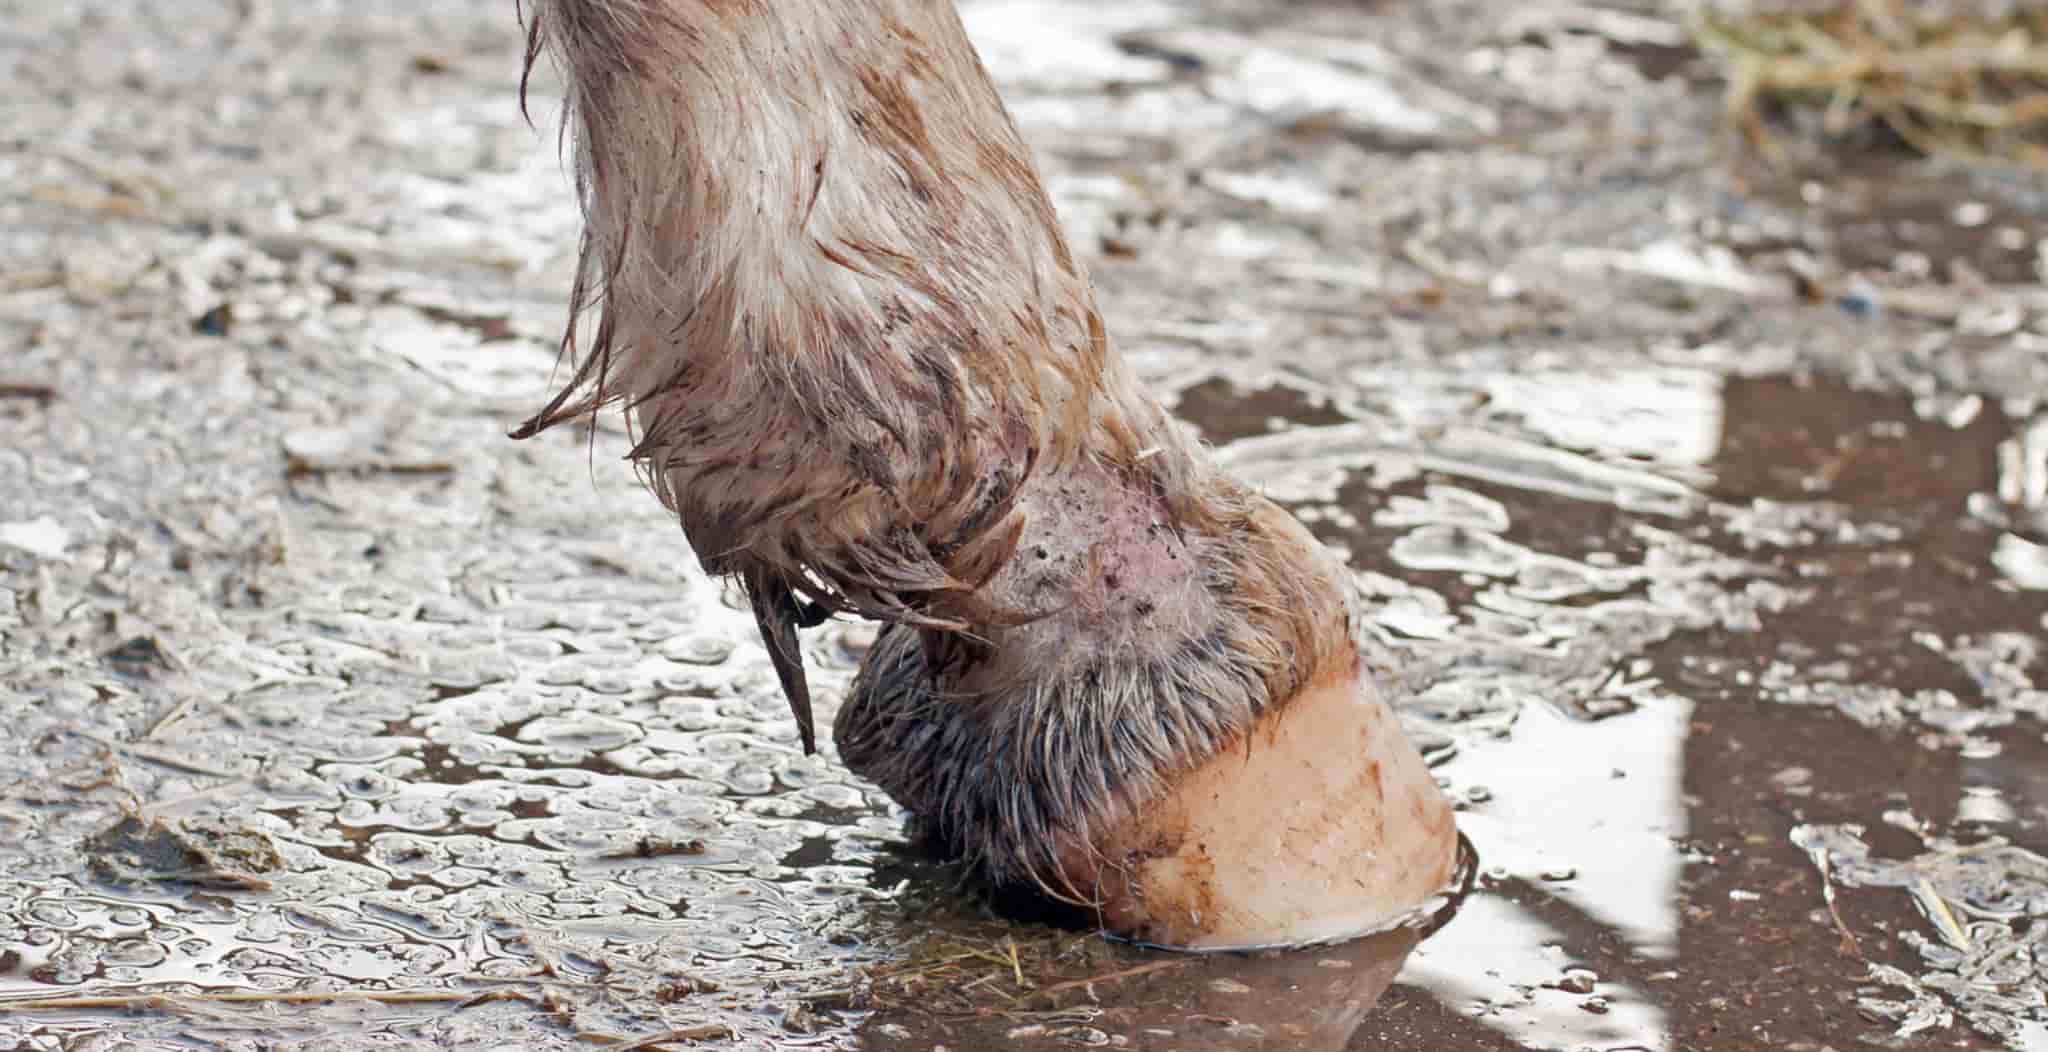 Mud fever in horses causes symptoms and treatments equ streamz blog article. Image of horse with signs of mud fever.